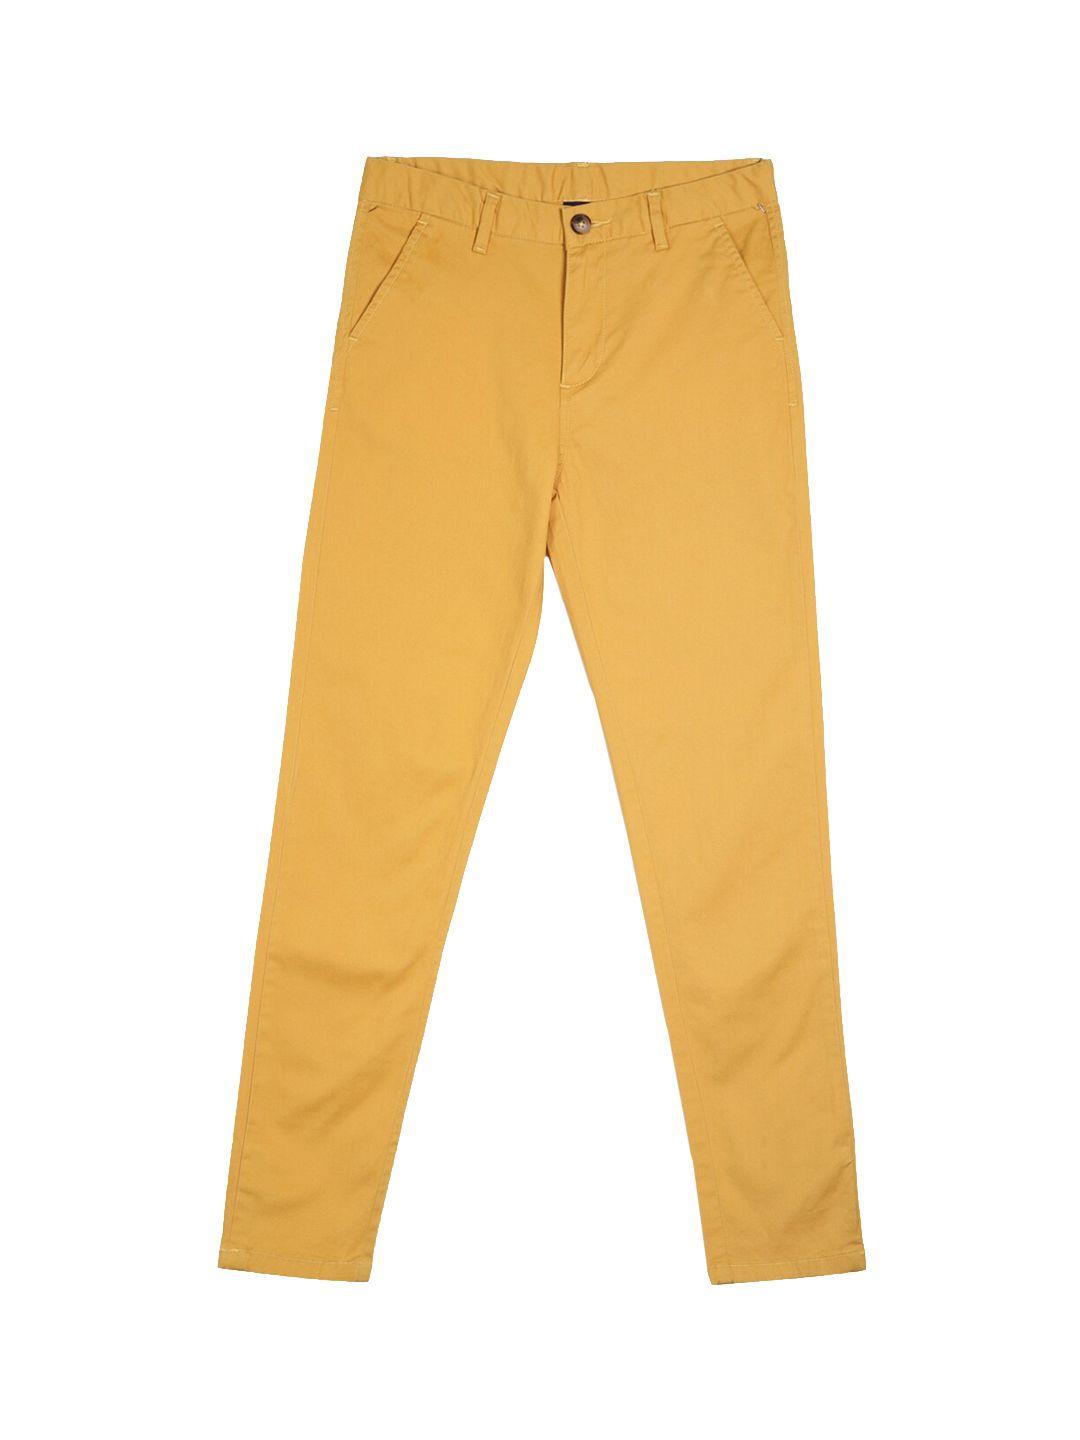 peter england boys mustard yellow cotton chinos trousers